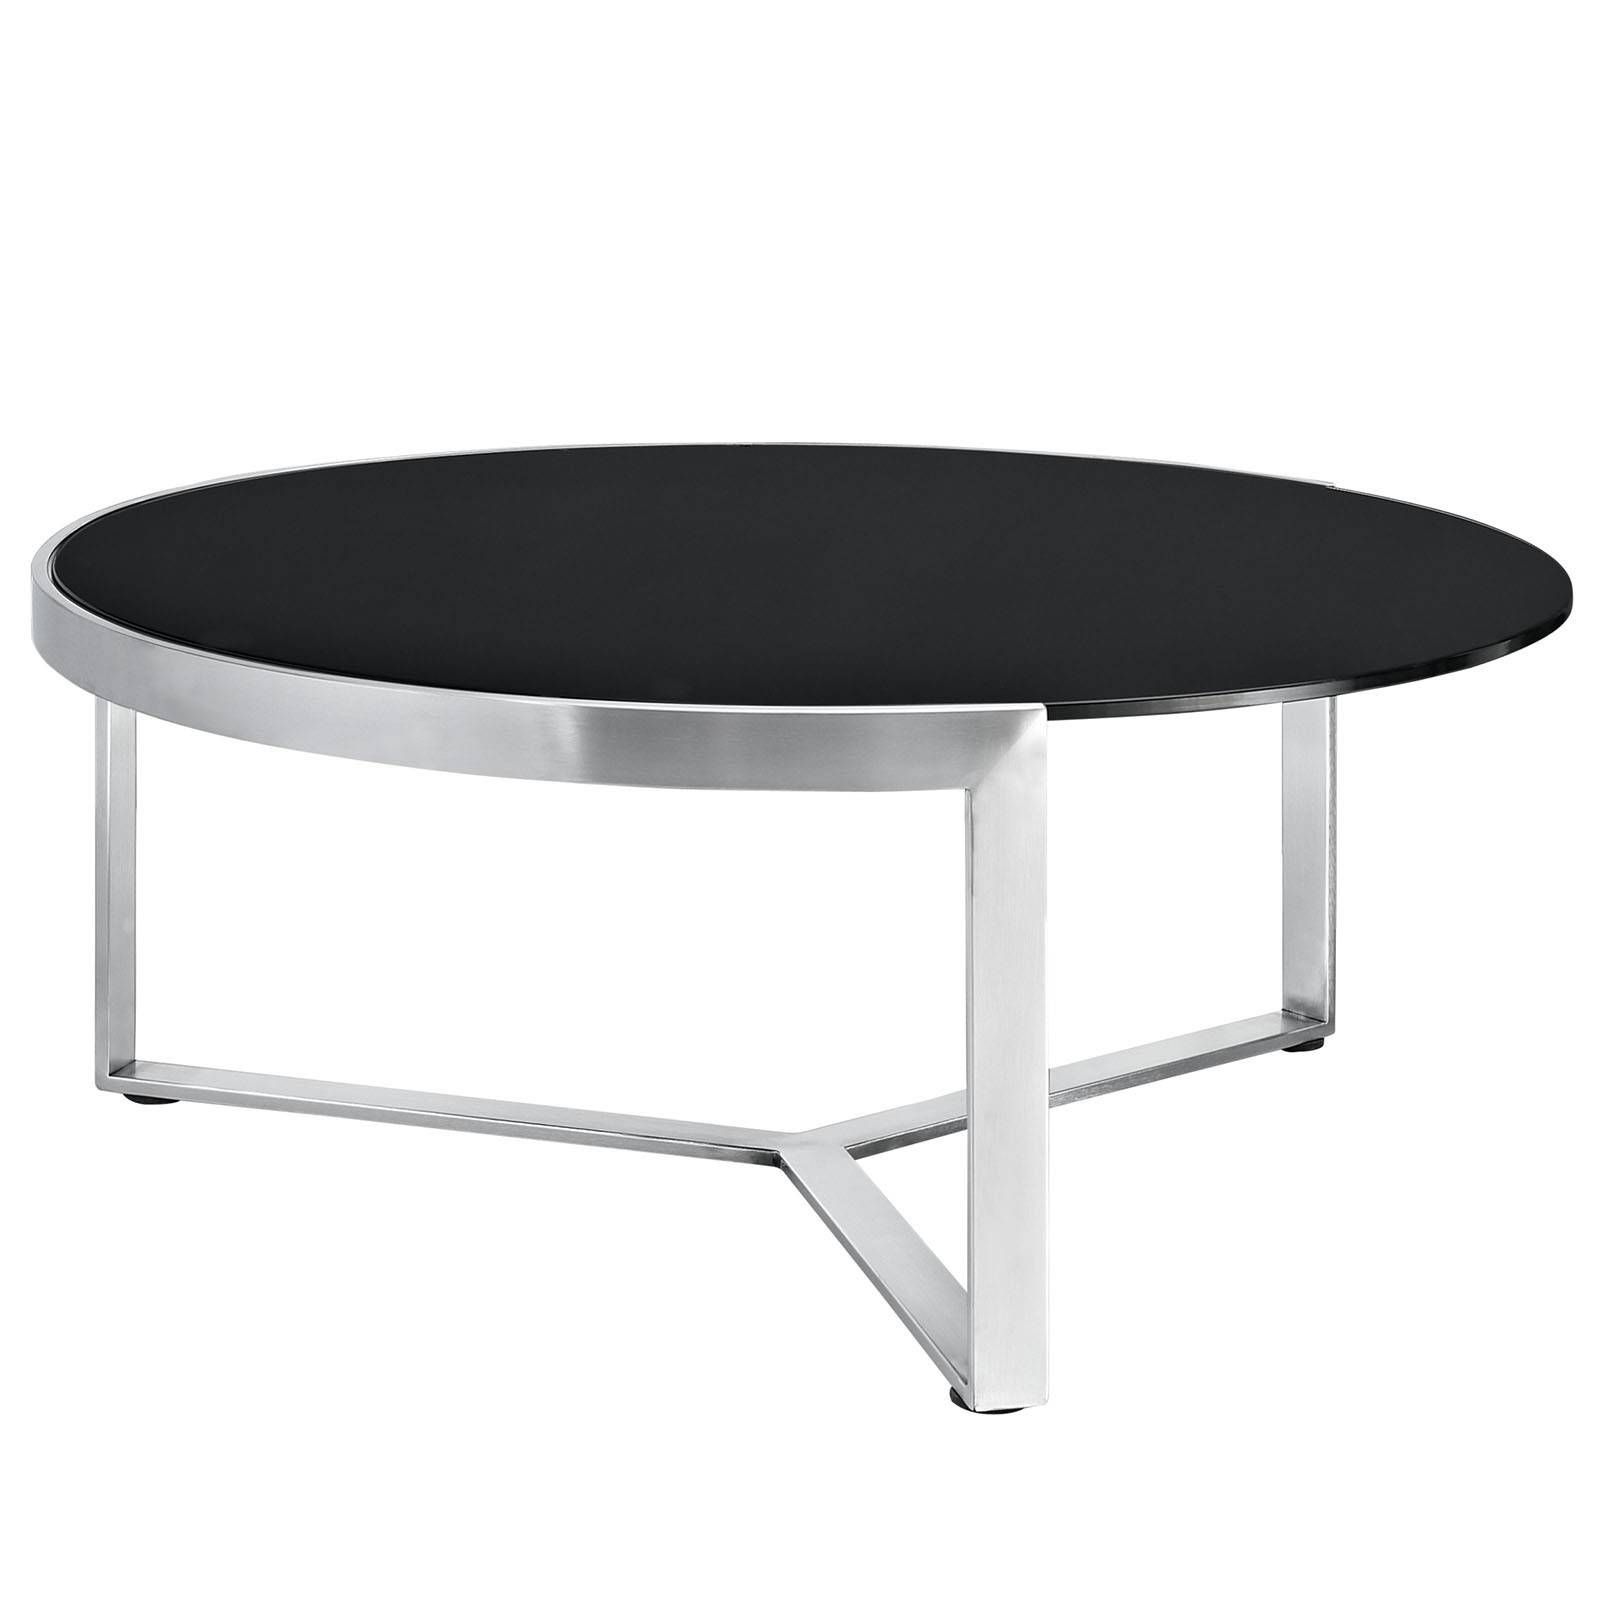 Stylish Modern Round Coffee Table With Slim Wooden Top Painted Regarding Round Steel Coffee Tables (View 4 of 30)